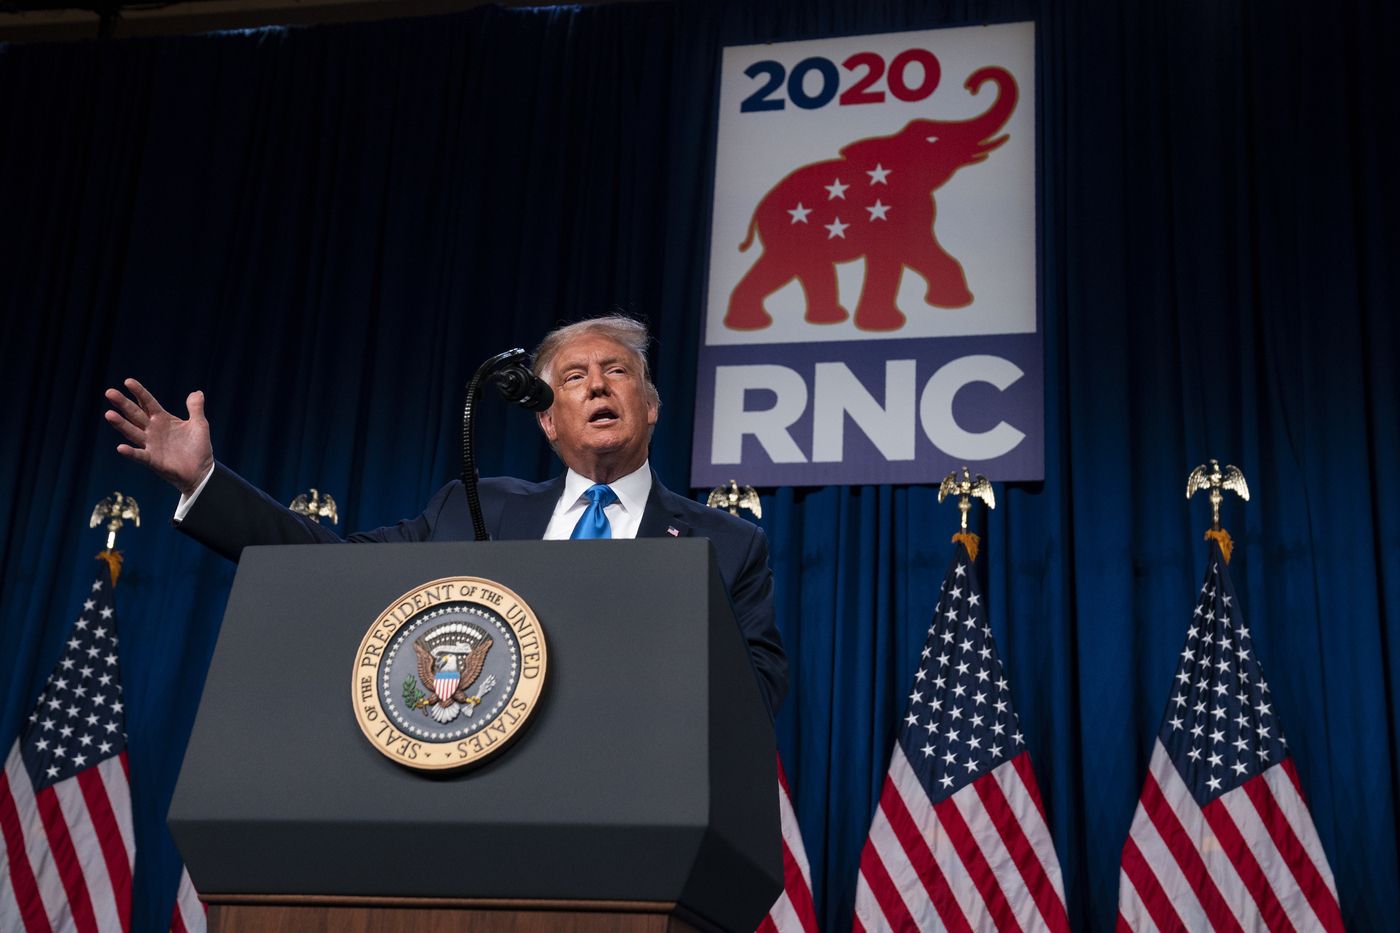 President Donald Trump arrives to speak at Republican National Committee convention, Monday, Aug. 24, 2020, in Charlotte. (AP Photo/Evan Vucci)